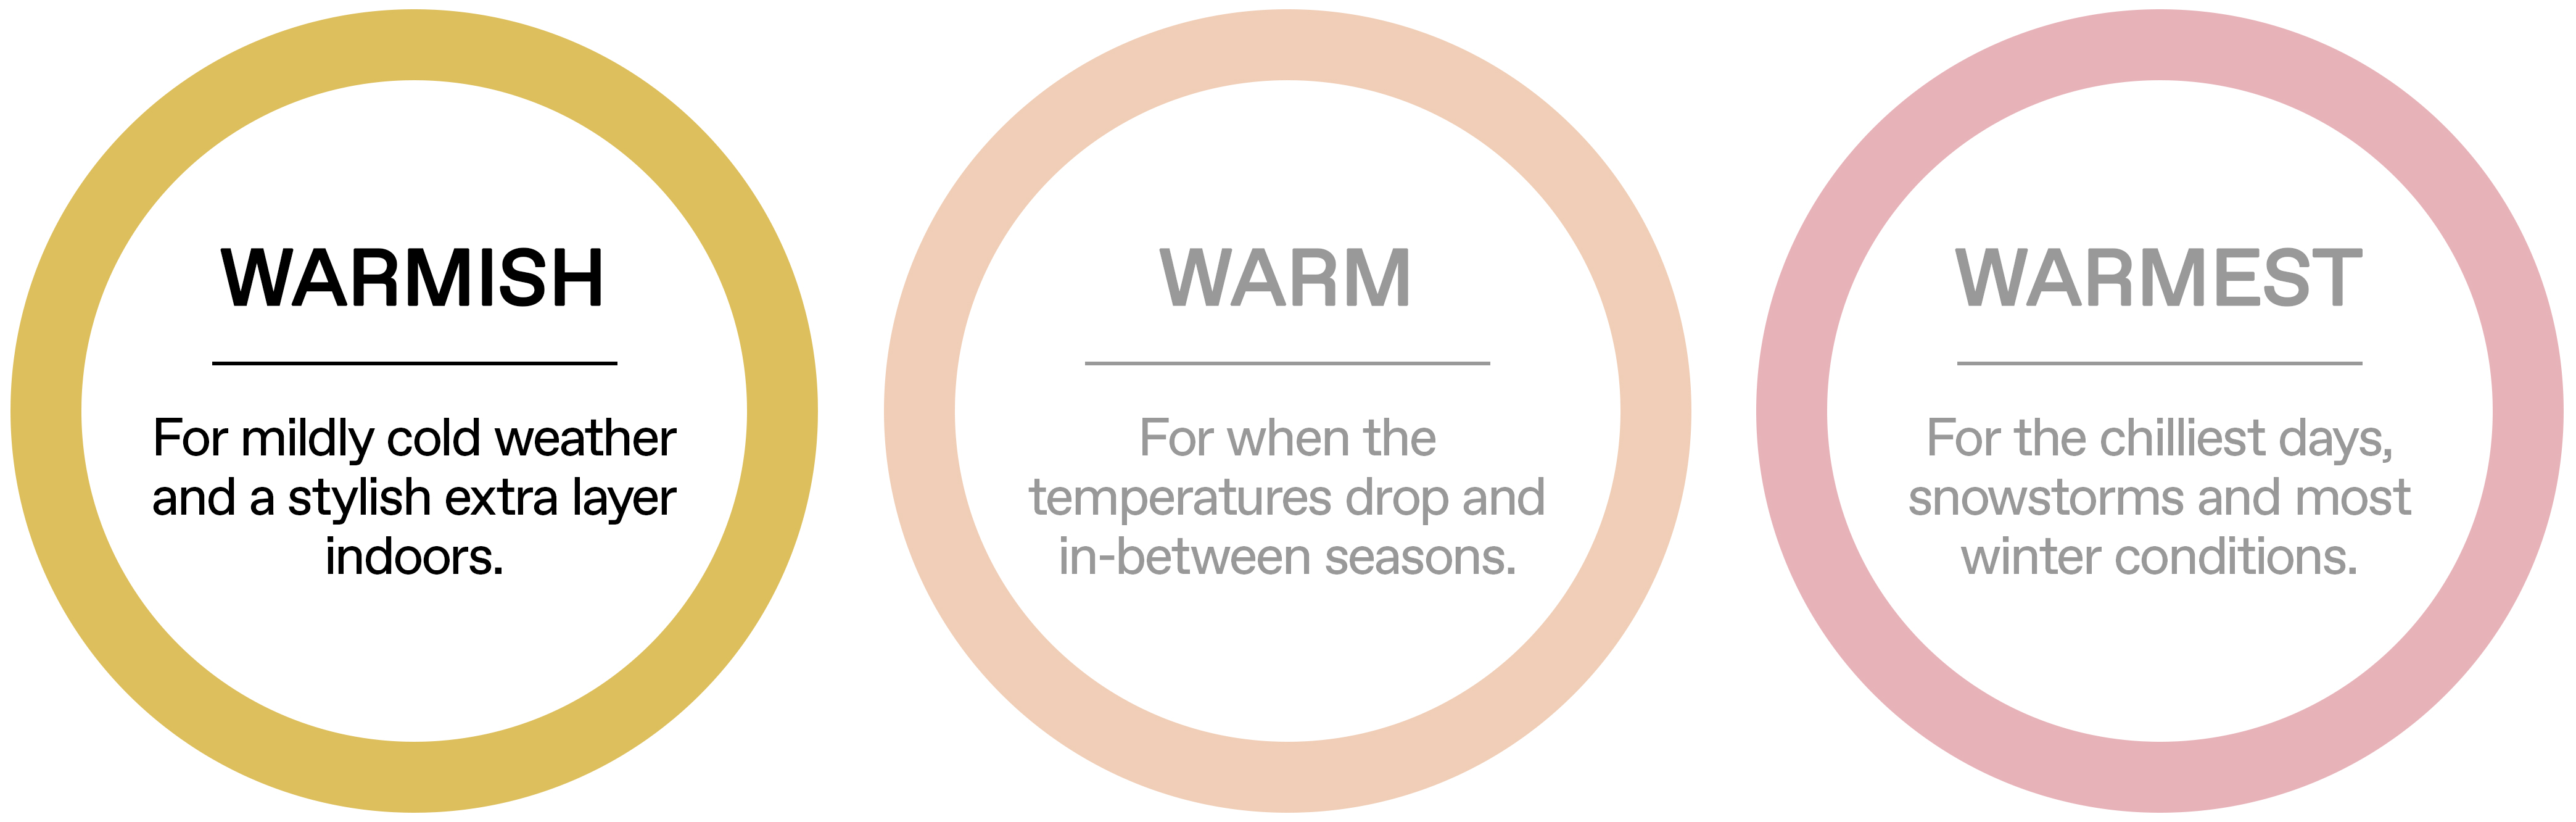 Warmish: For mildly cold weather and a stylish extra layer indoors